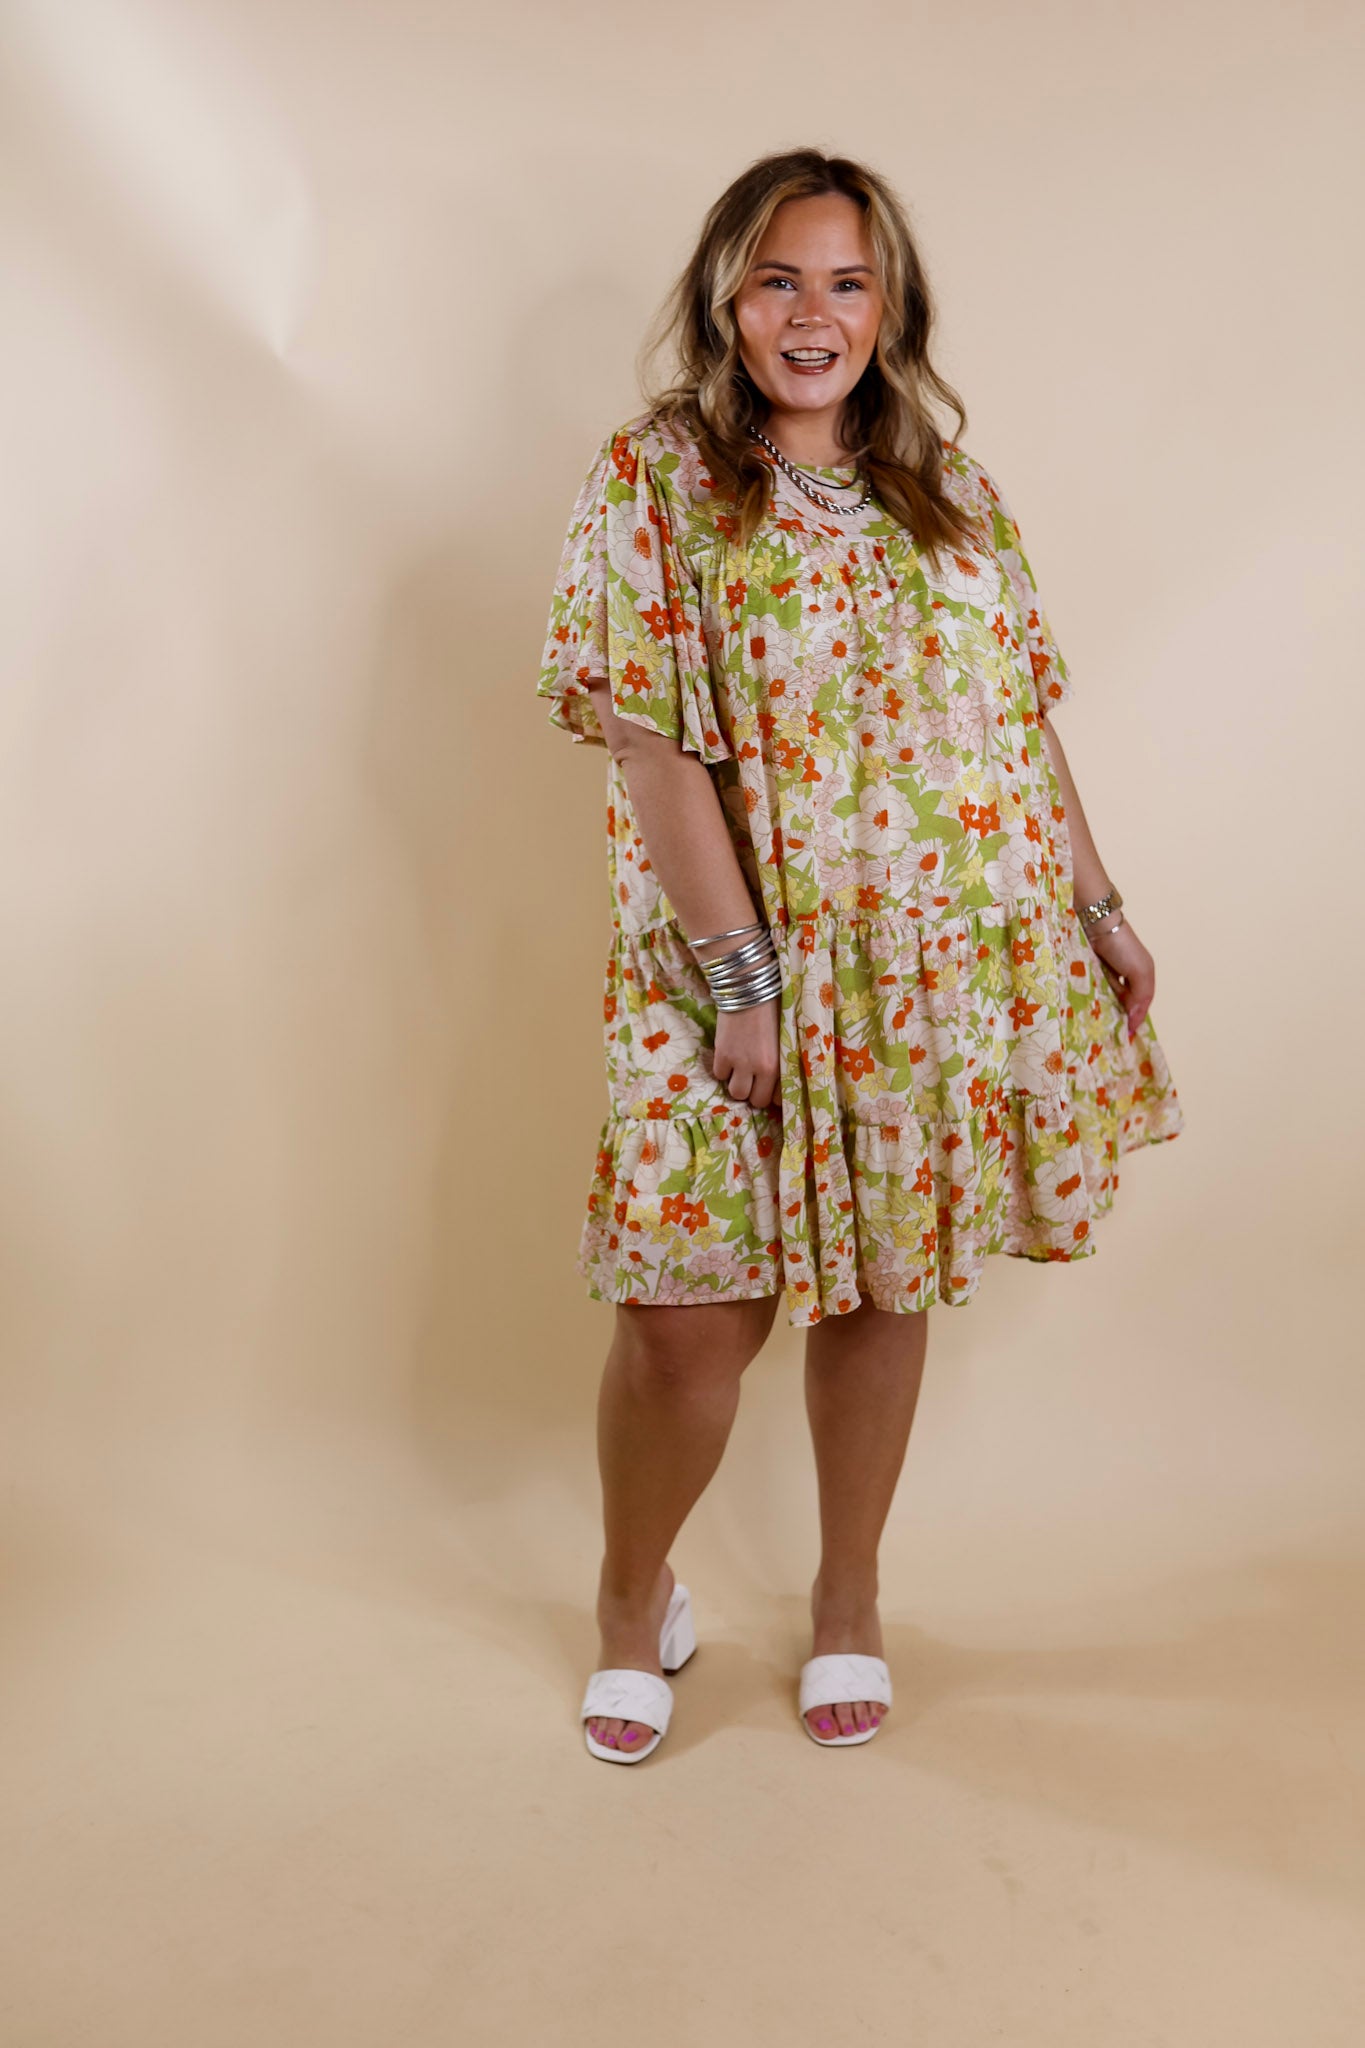 State of Bliss Ruffle Tiered Floral Dress in Lime Green and Orange - Giddy Up Glamour Boutique